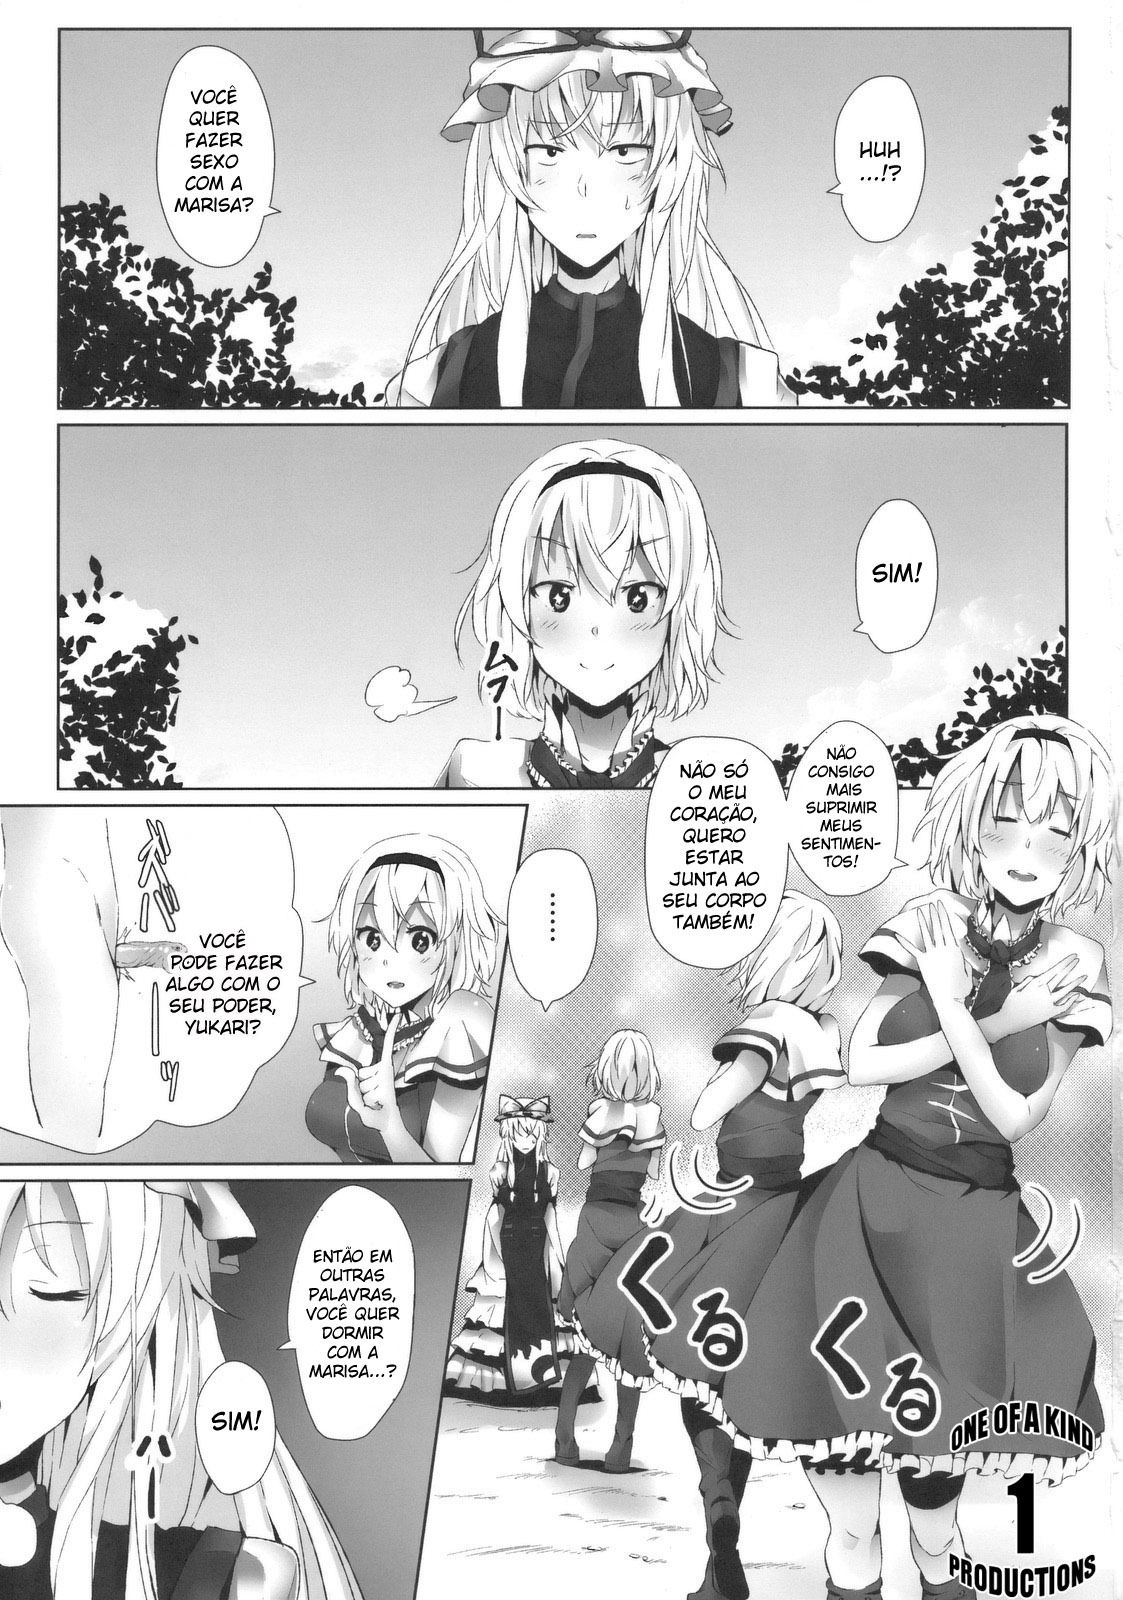 (C78) [Galley (ryoma)] Alice in Underland (Touhou Project) [Portuguese-BR] [Chrono Kimera H] page 3 full